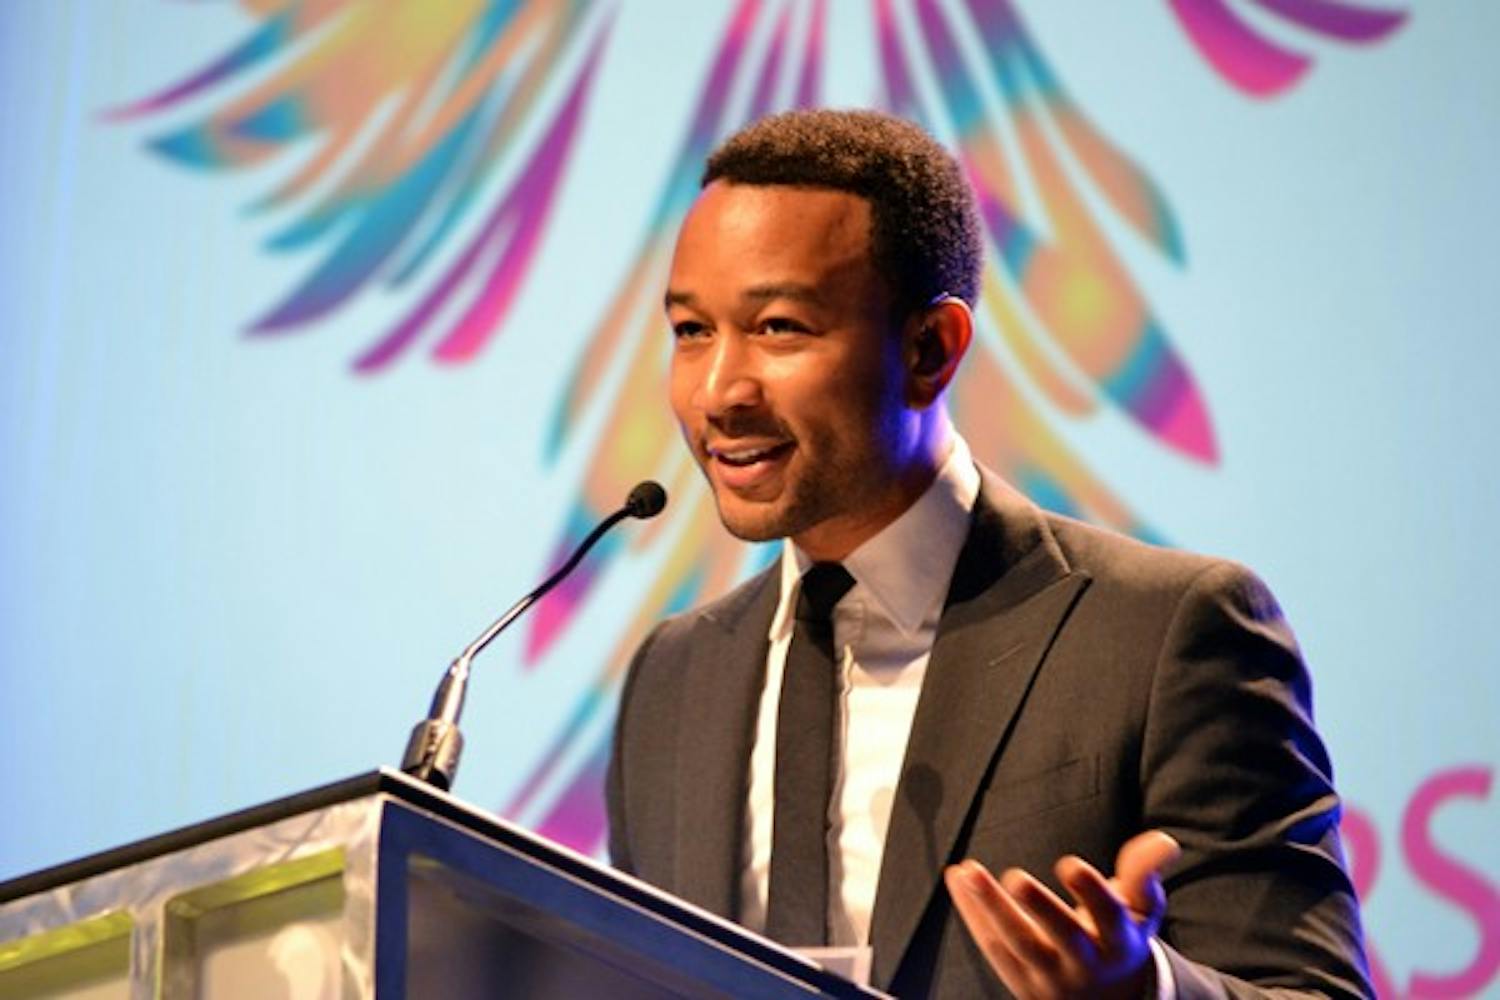 Singer, songwriter and philanthropist John Legend spoke about improving education at the NASPA Student Affairs Administrators in Higher Education Conference in downtown Phoenix. (Photo by Mackenzie McCreary)